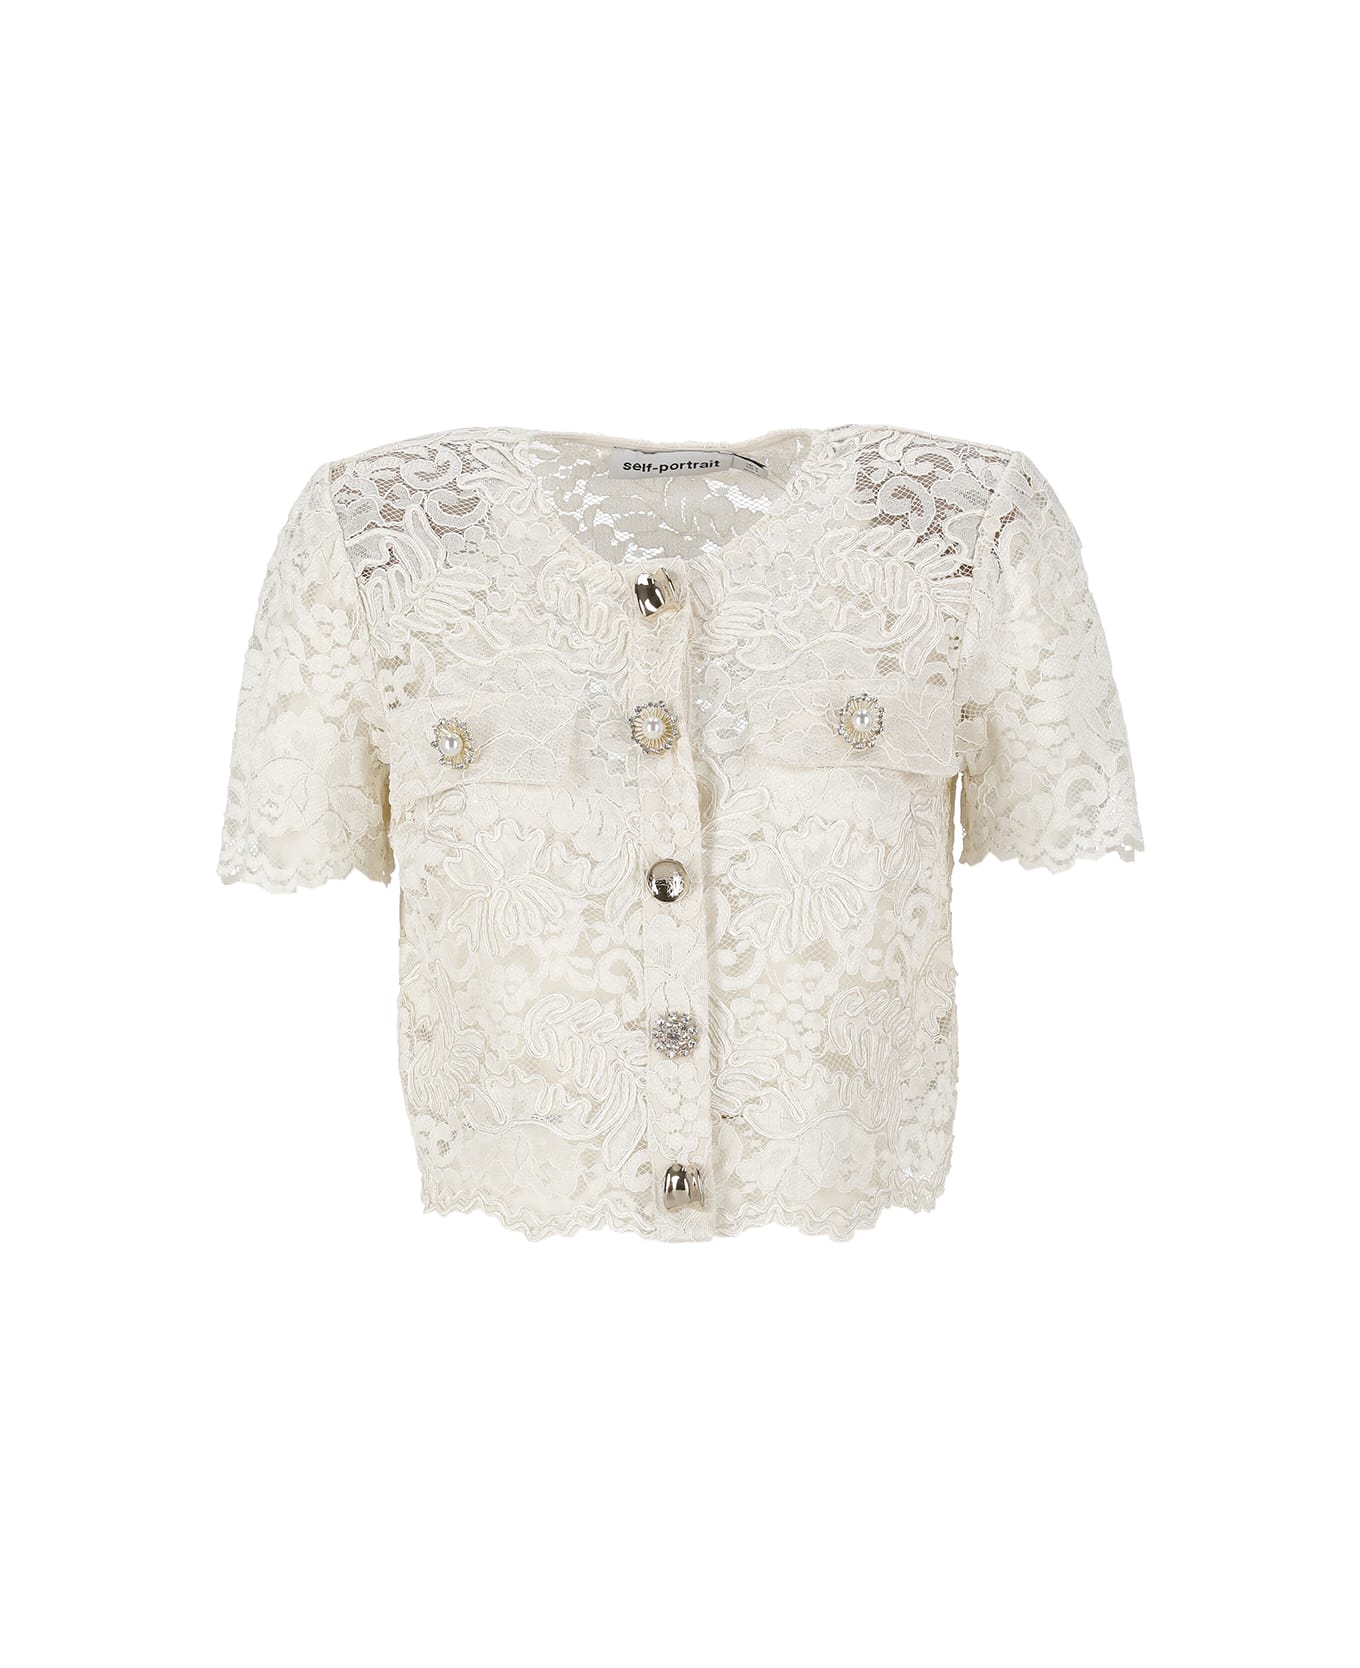 self-portrait Lace Cord Top - Ivory タンクトップ